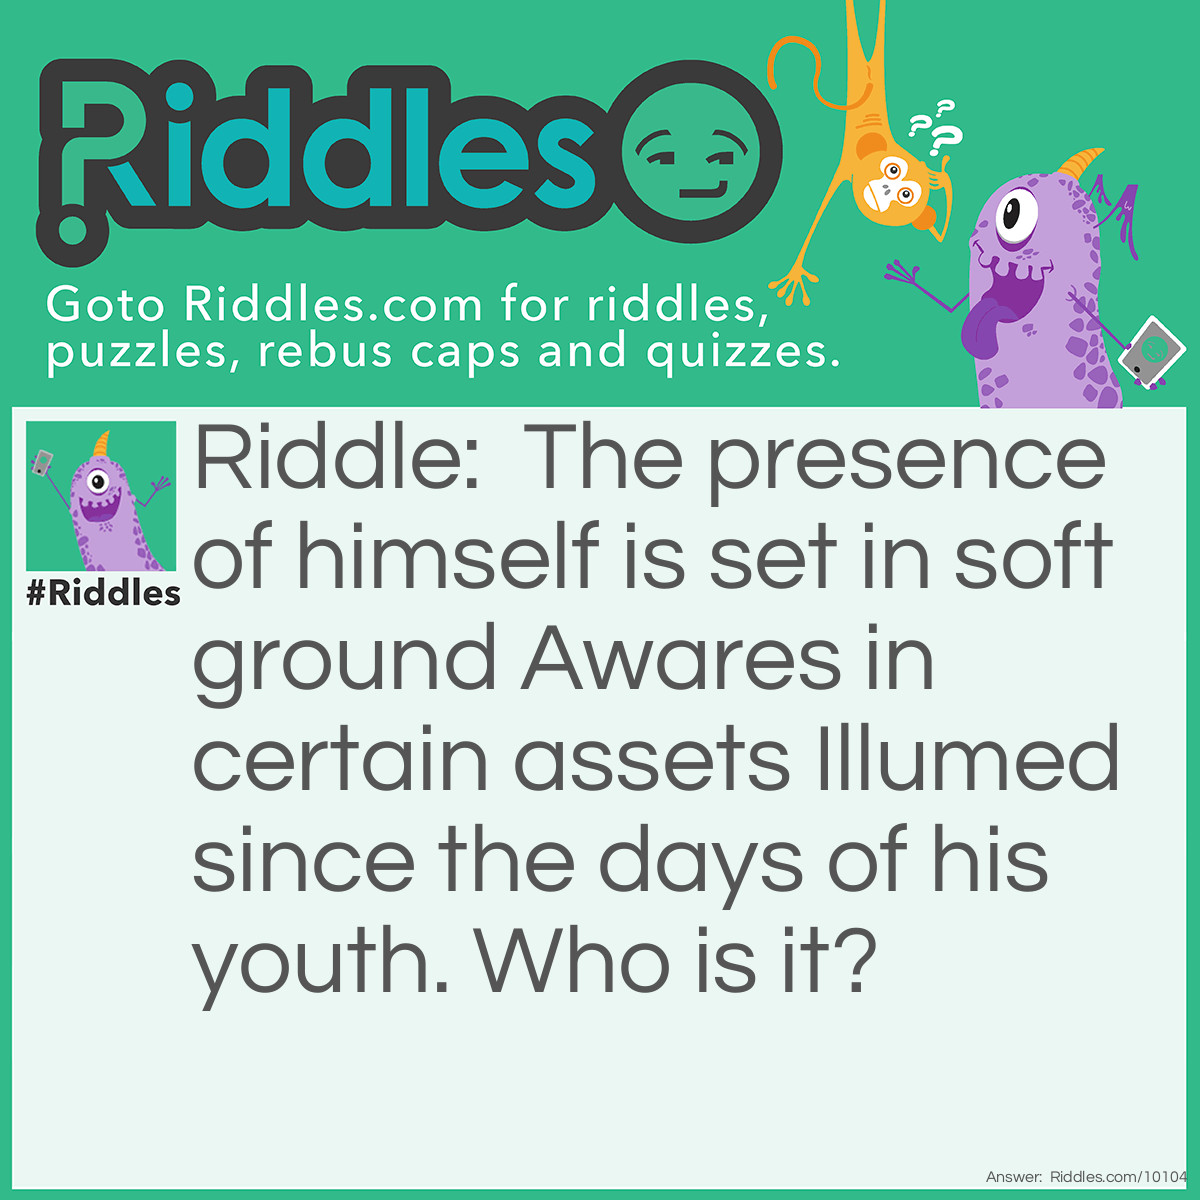 Riddle: The presence of himself is set in soft ground Awares in certain assets Illumed since the days of his youth. Who is it? Answer: “Unanswered”